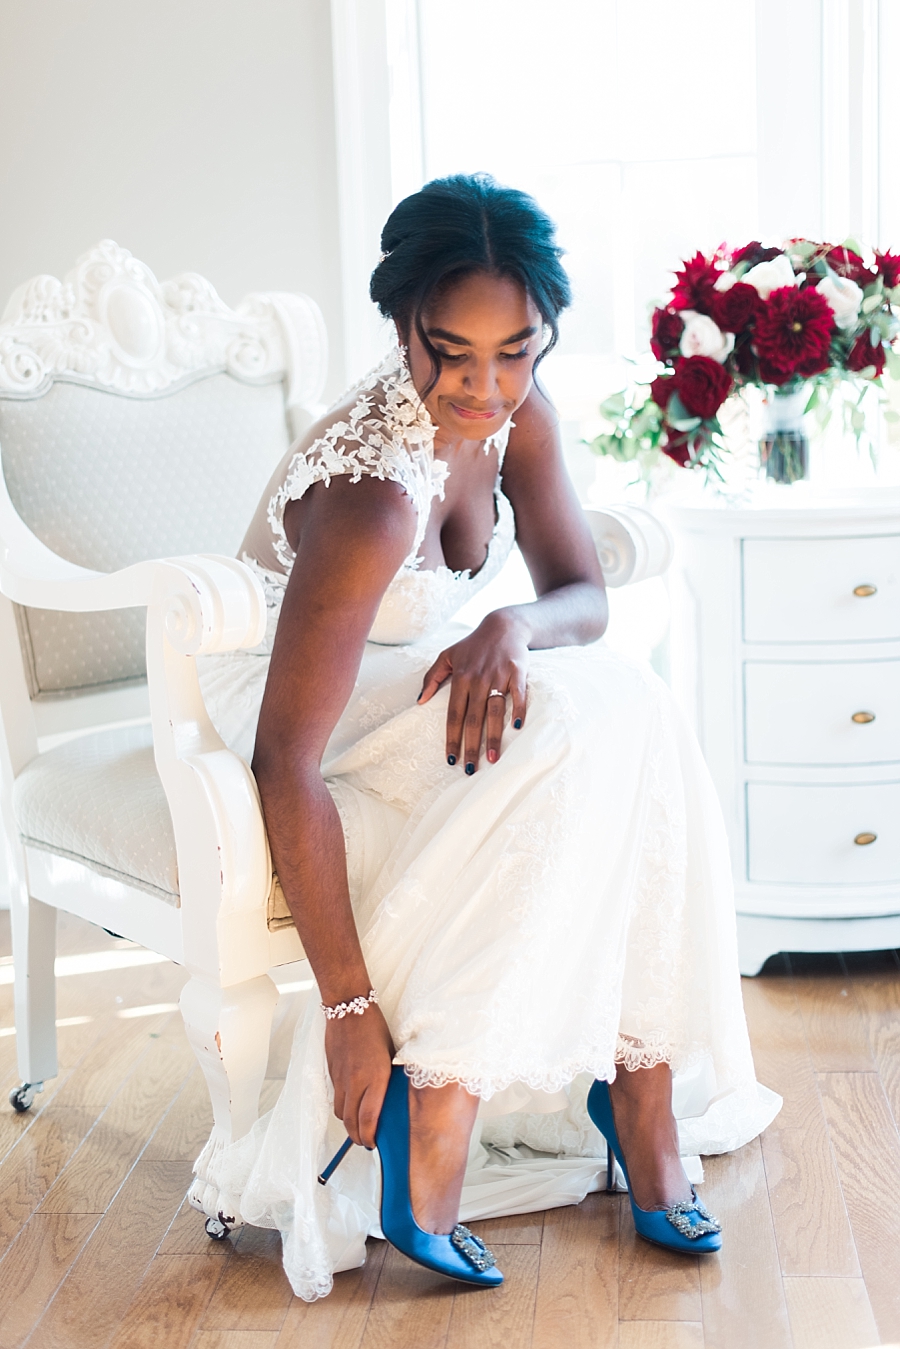 4 Tips when Choosing a Getting Ready Location for your Wedding Day | Wedding Planning Tips for Brides and Grooms by Hillary Muelleck